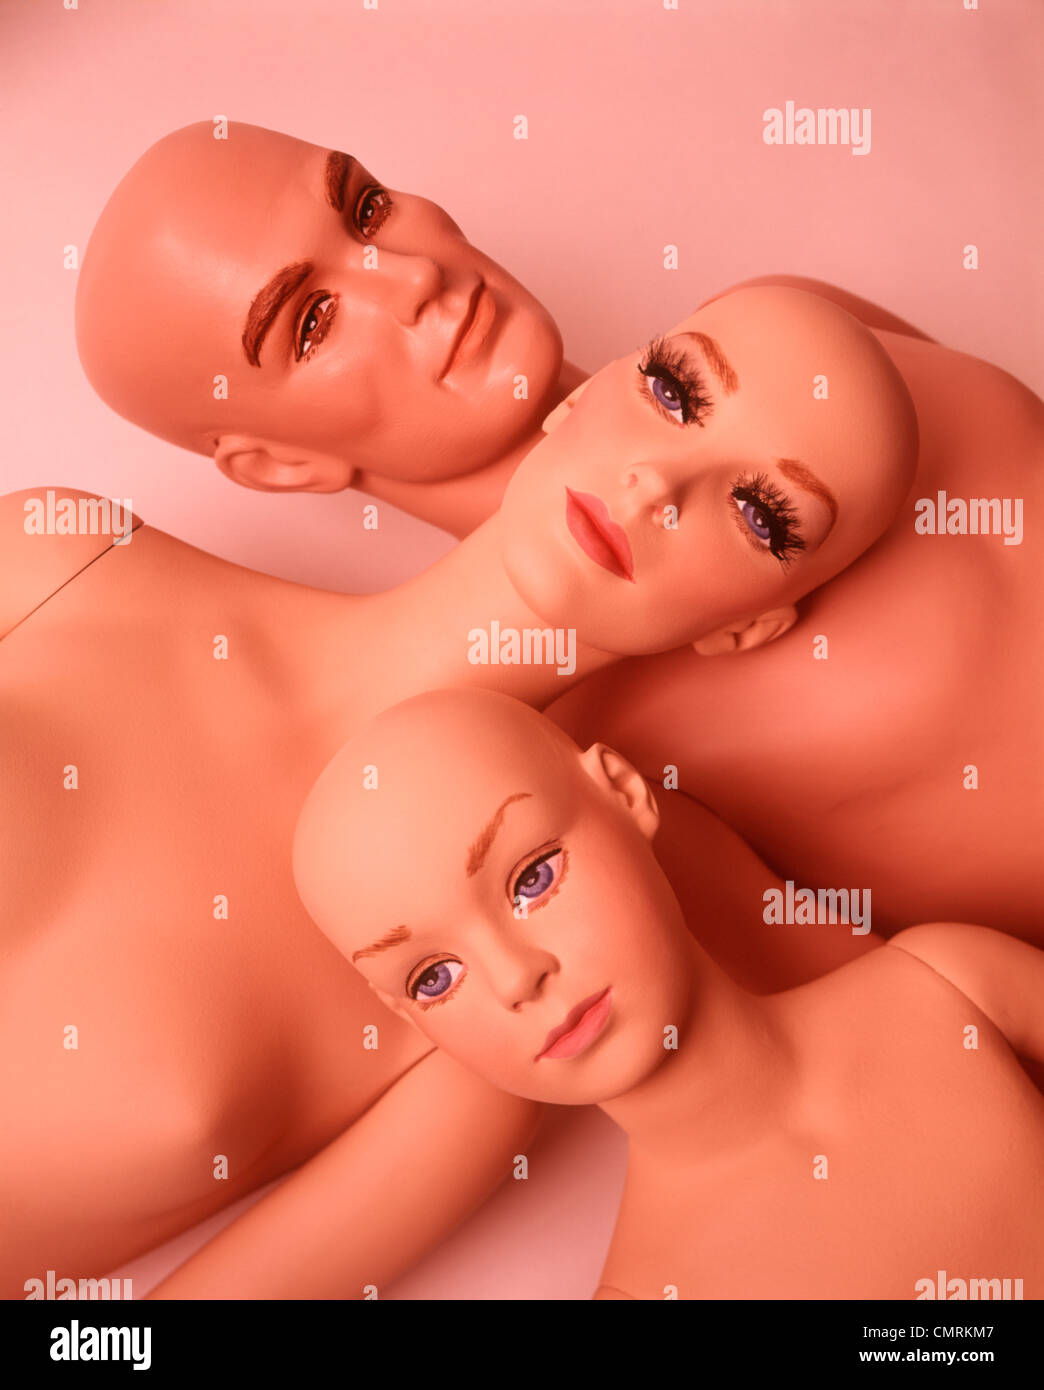 1970 1970s FAMILY 3 DUMMIES MANNEQUINS BALD STIFF MOTHER FATHER CHILD ALIENS CLONES WEIRD WACKY FUNNY DUMMY MODELS Stock Photo